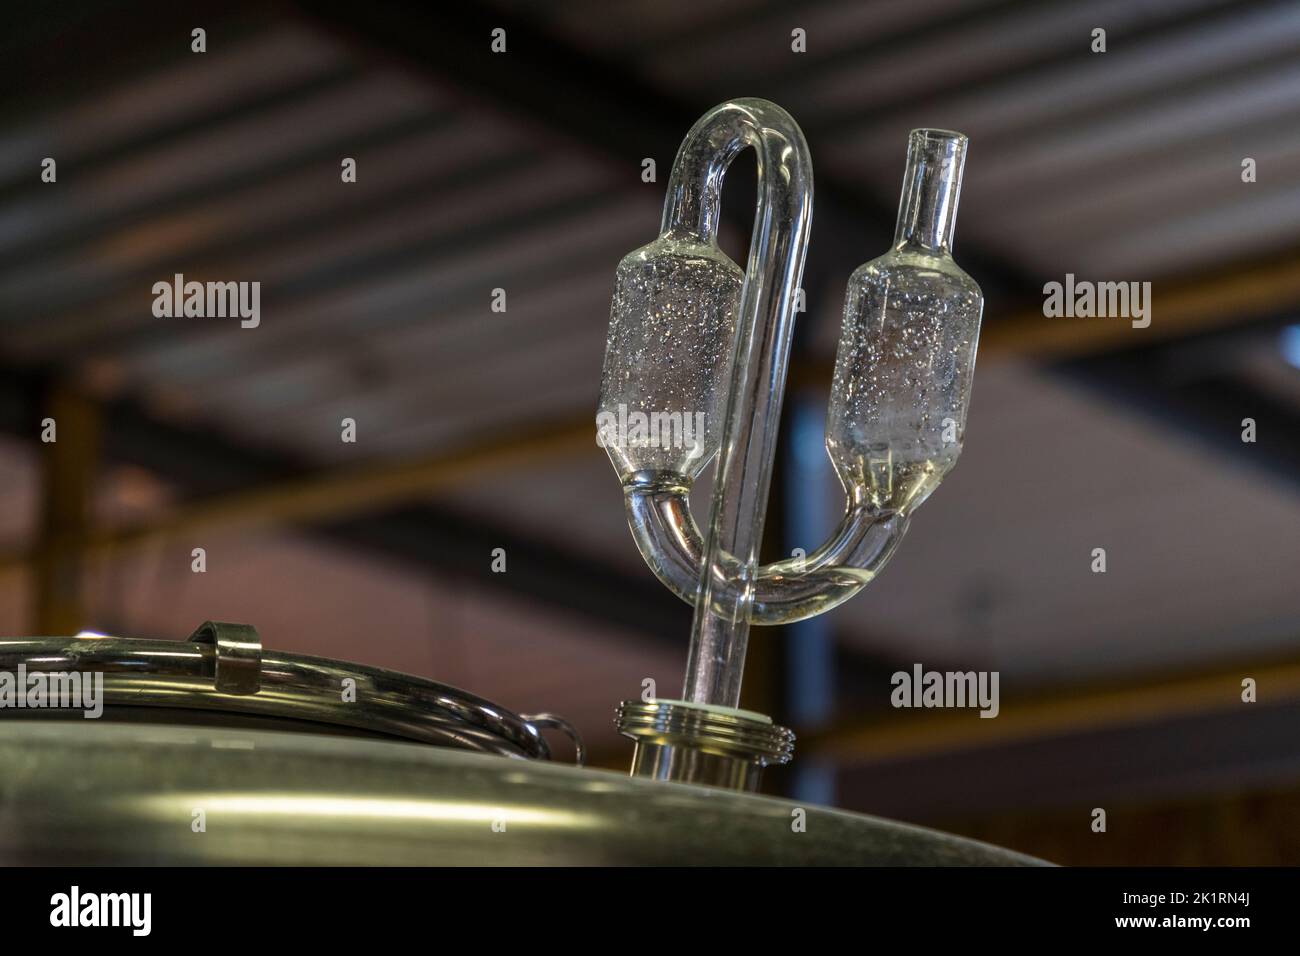 The Naùera Brewery in Lousteau, Lesparre-Médoc, France Stock Photo